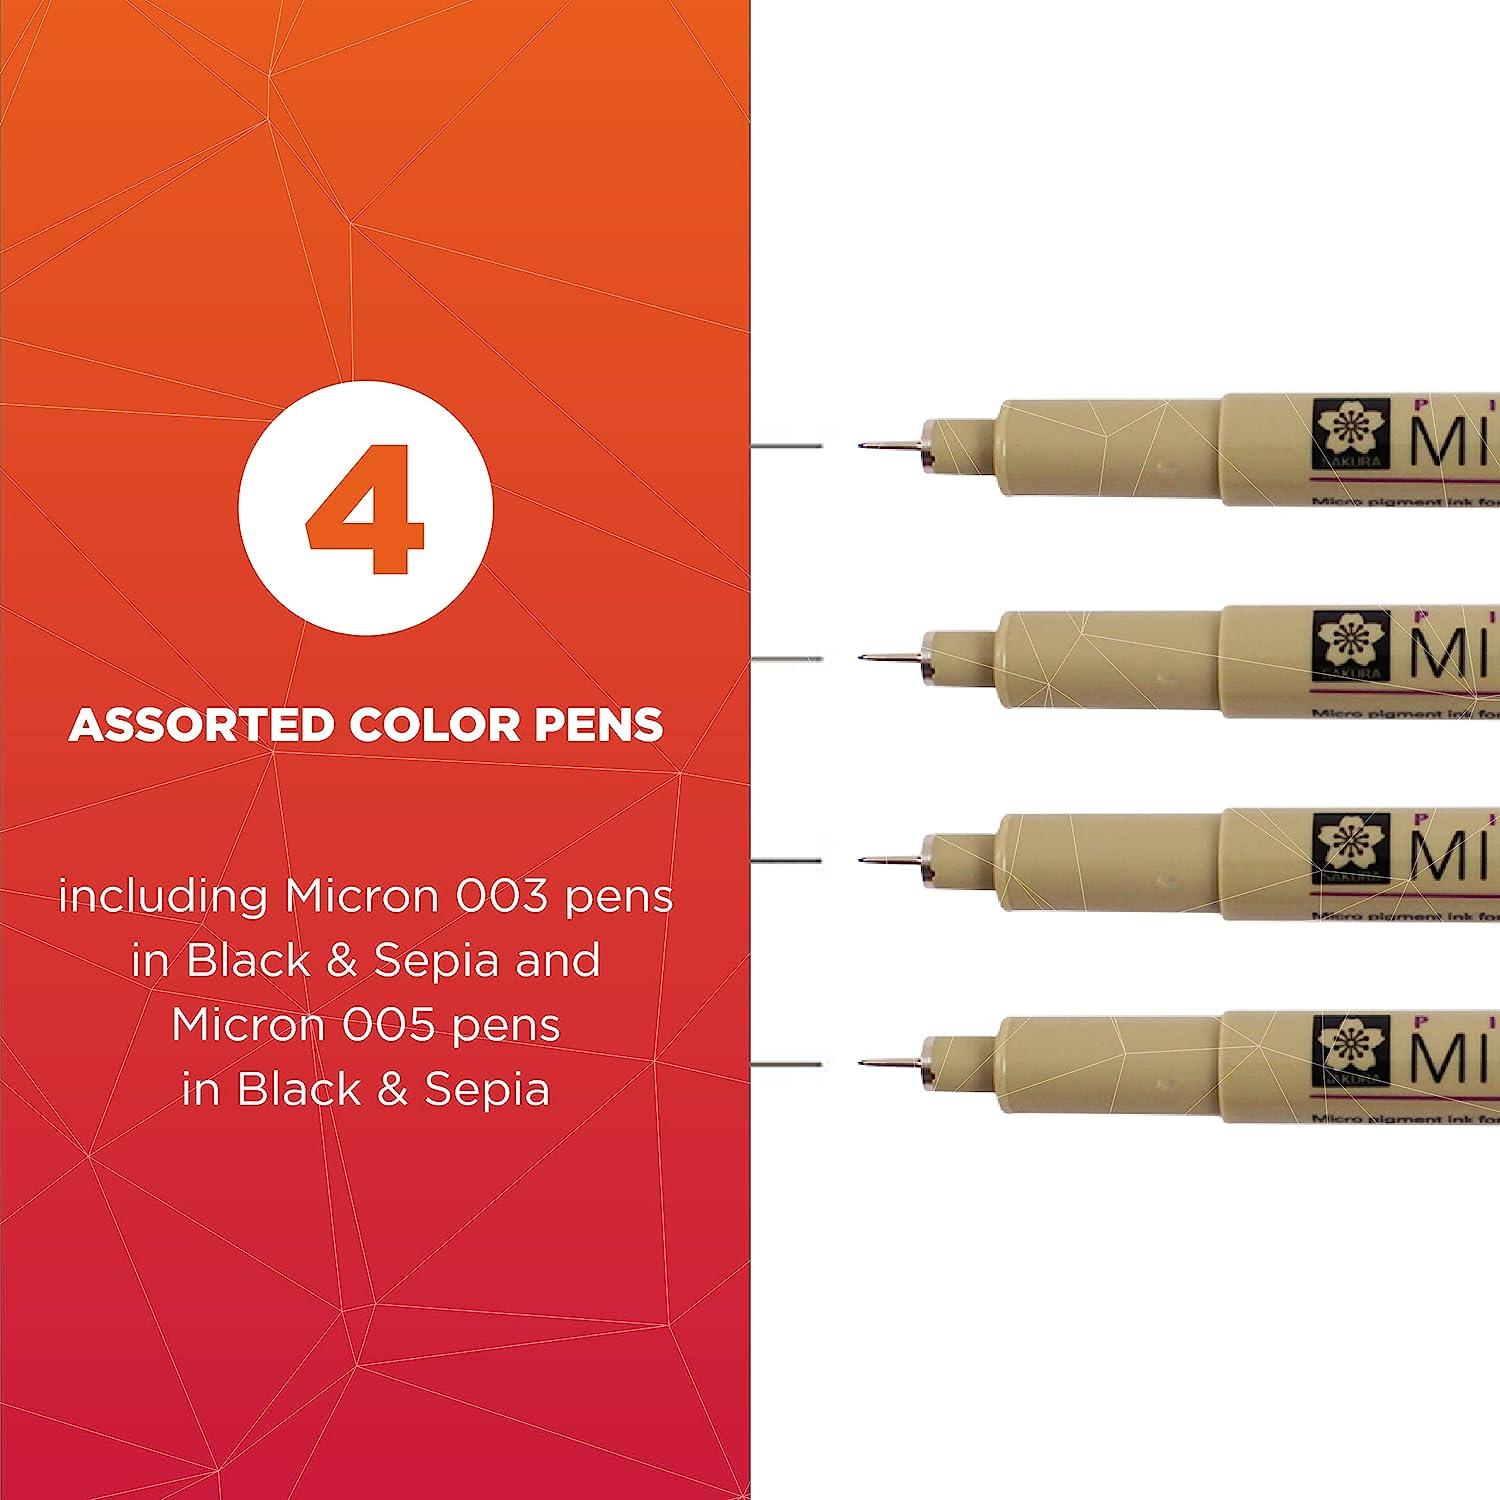 SAKURA Pigma Micron Fineliner Pens - Archival Black and Brown Ink Pens -  Pens for Writing Drawing or Journaling - Black and Brown Colored Ink - 003  and 005 Point Size - 4 Pack Fine Tip